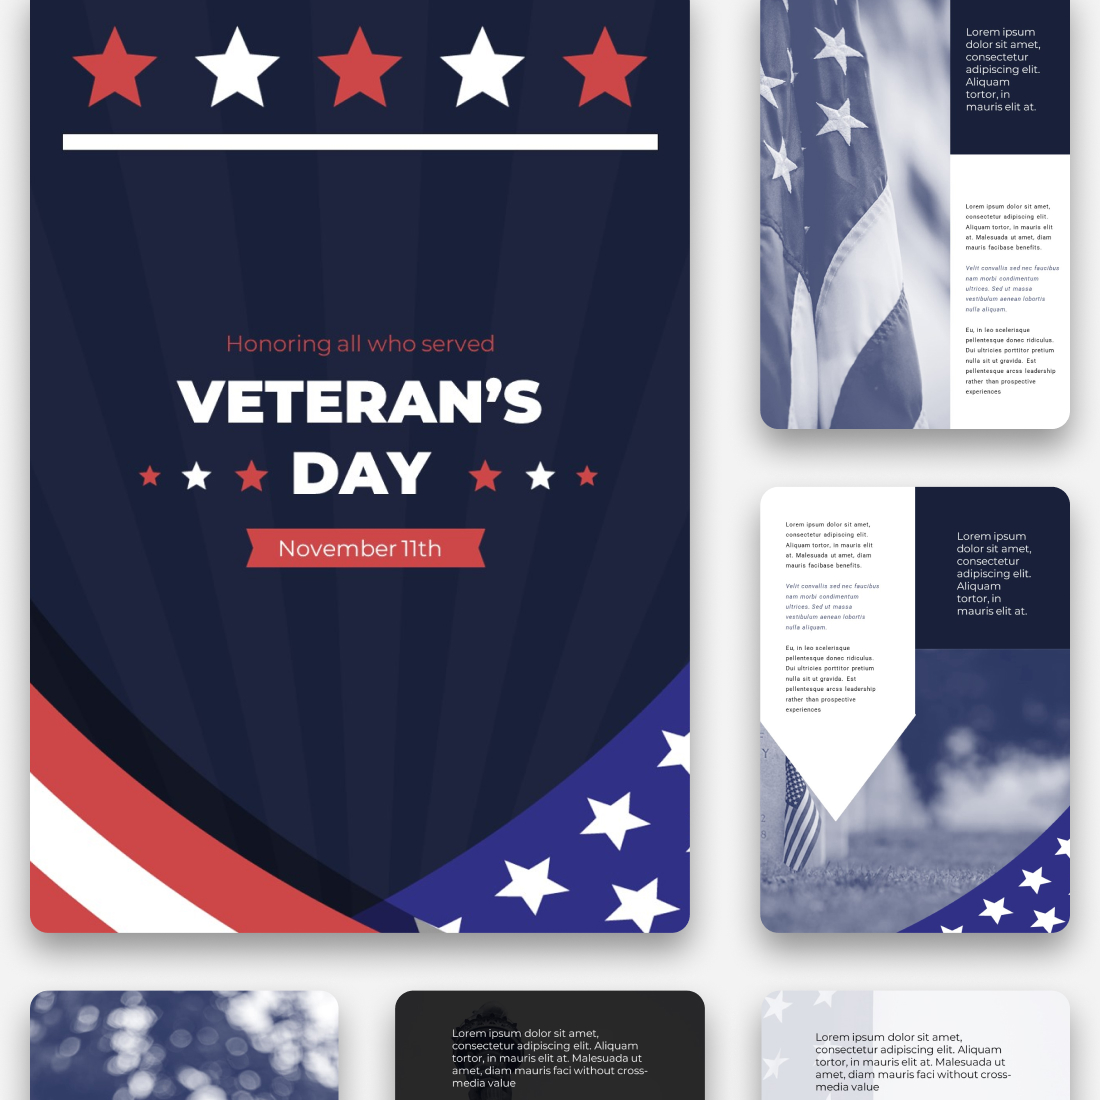 Preview veteransday powerpoint template.